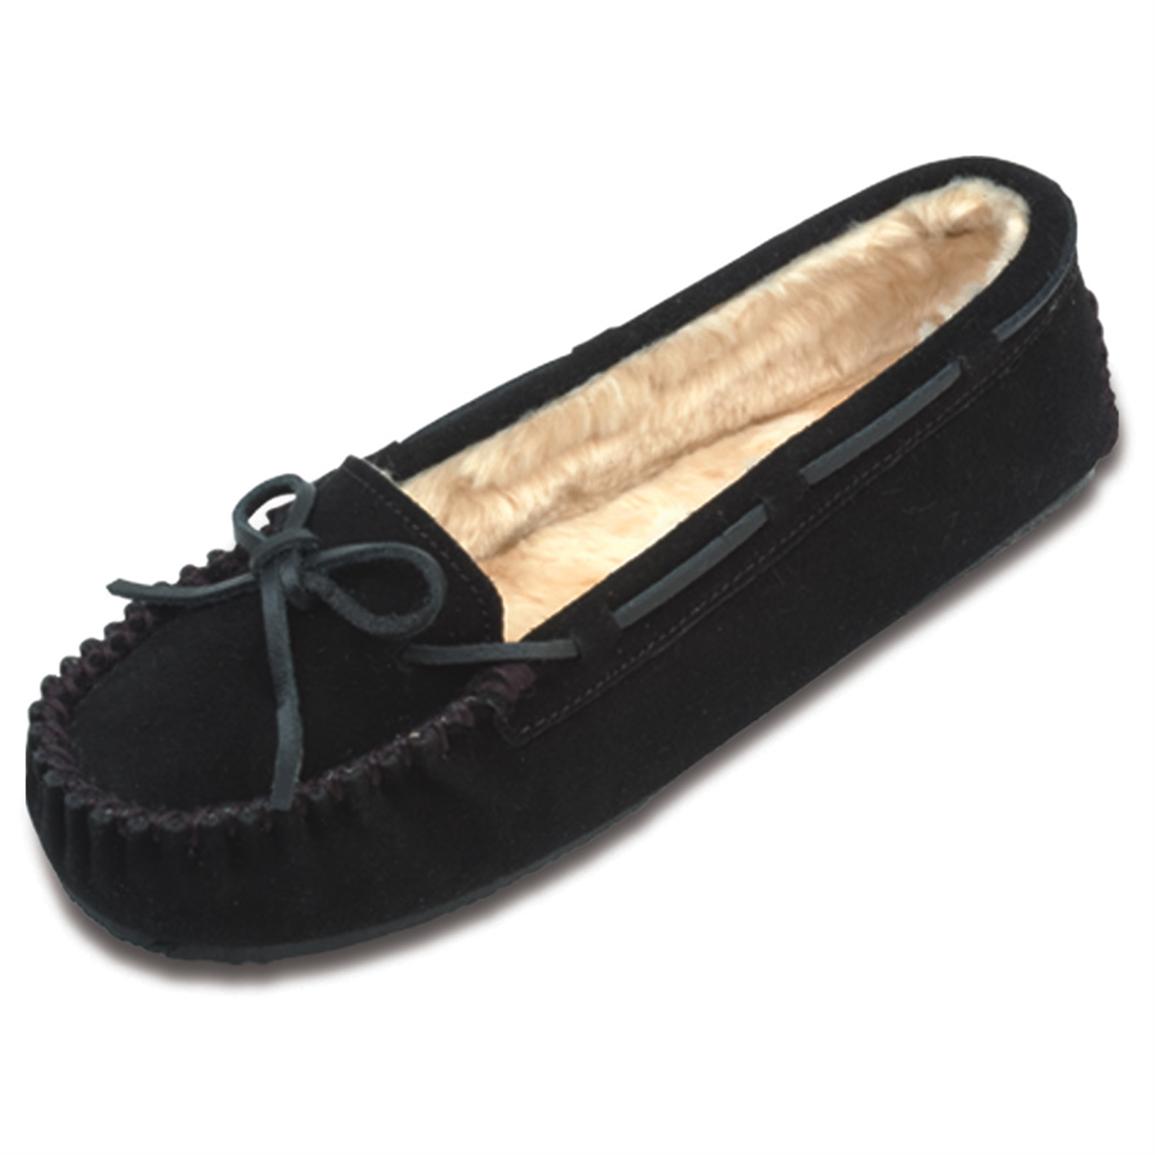 womens black moccasin slippers